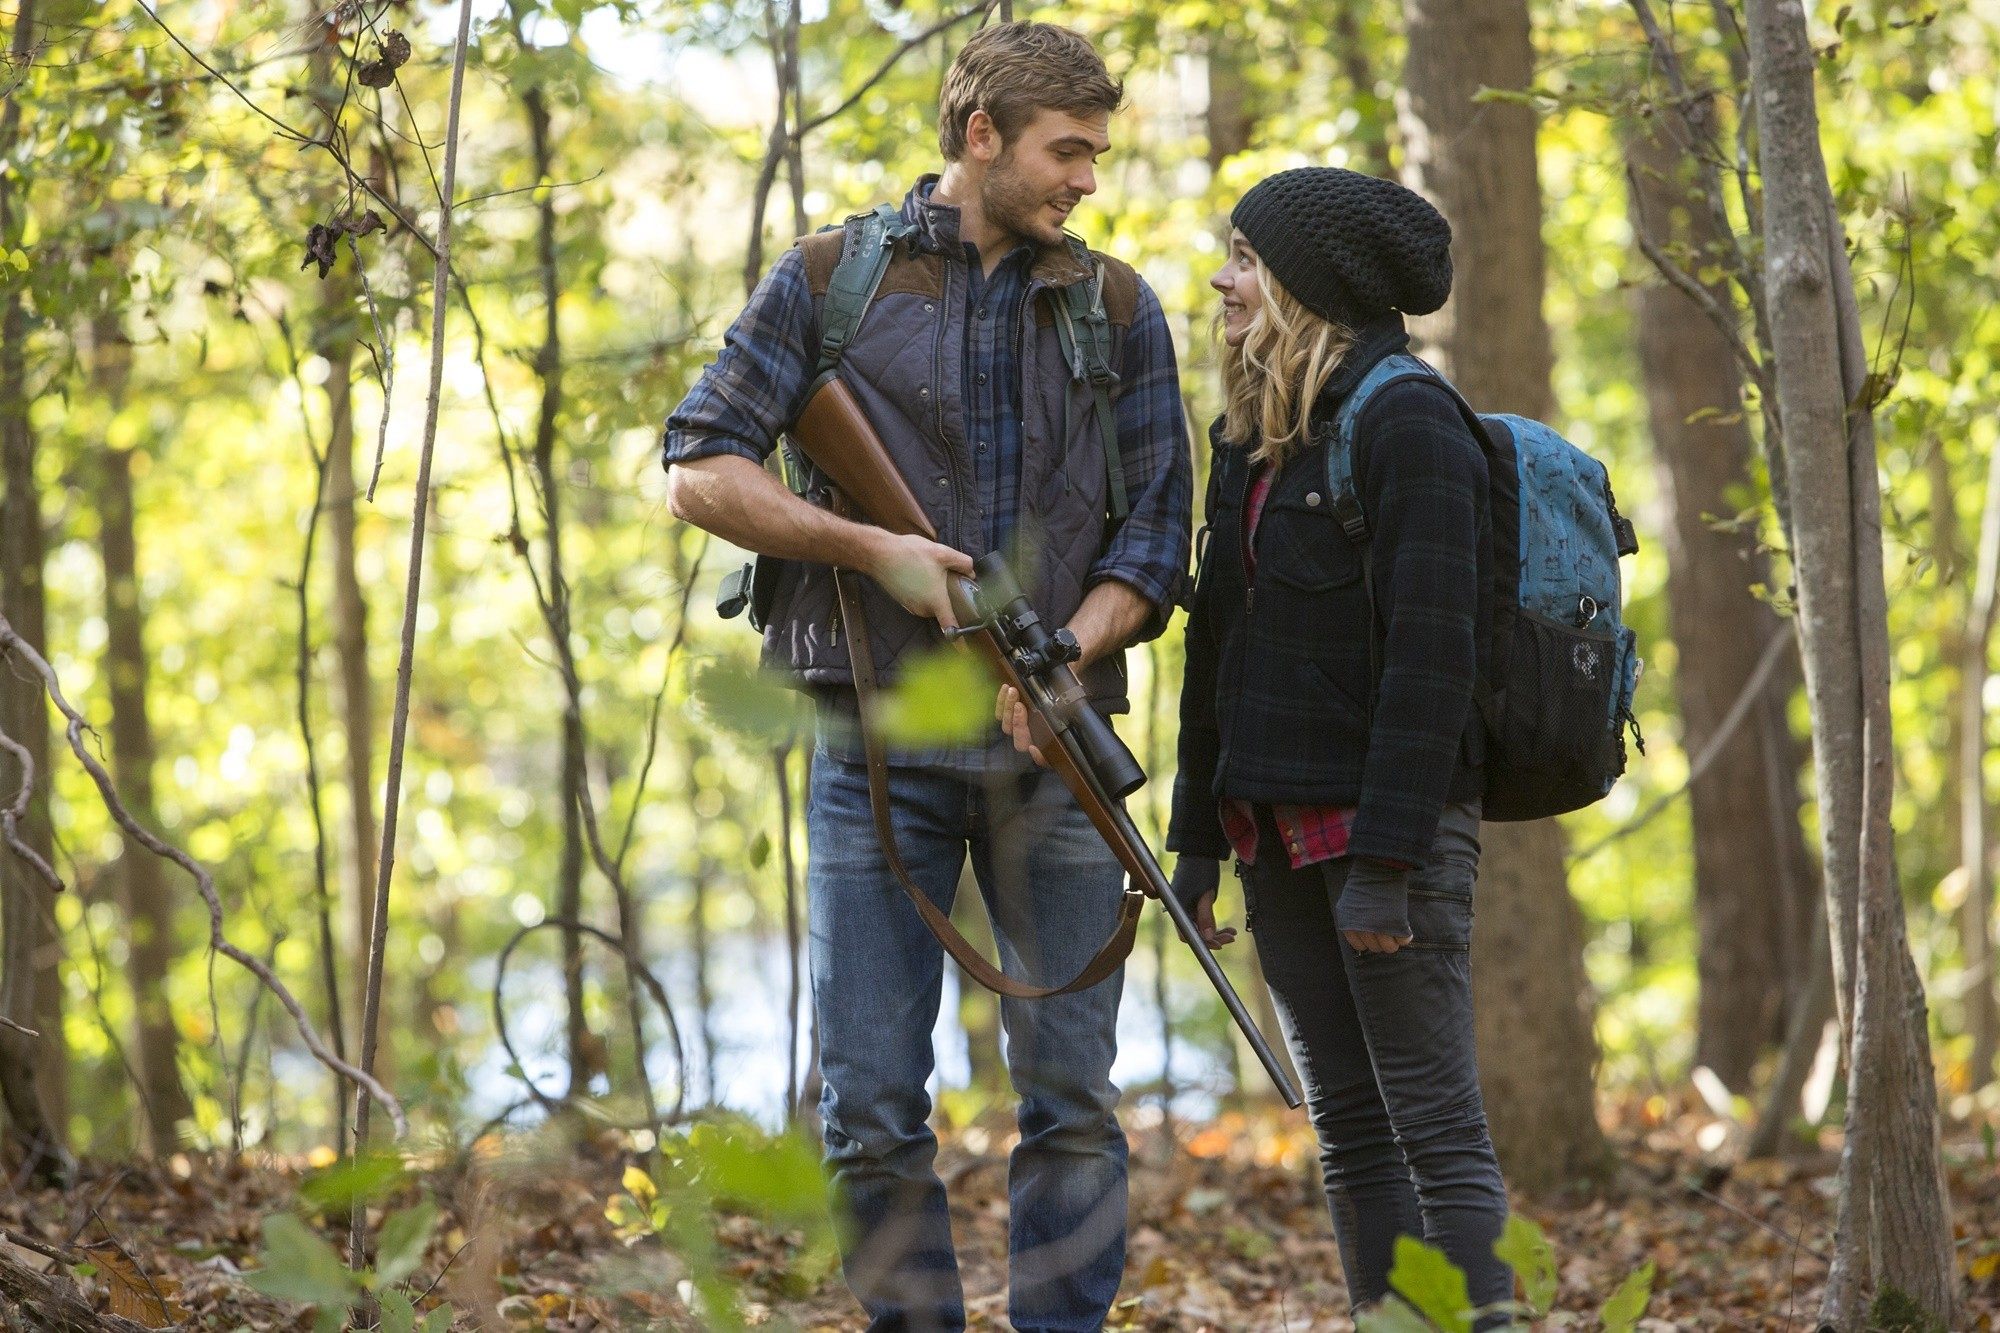 Alex Roe stars as Evan Walker and Chloe Moretz stars as Cassie Sullivan in Columbia Pictures' The 5th Wave (2016)